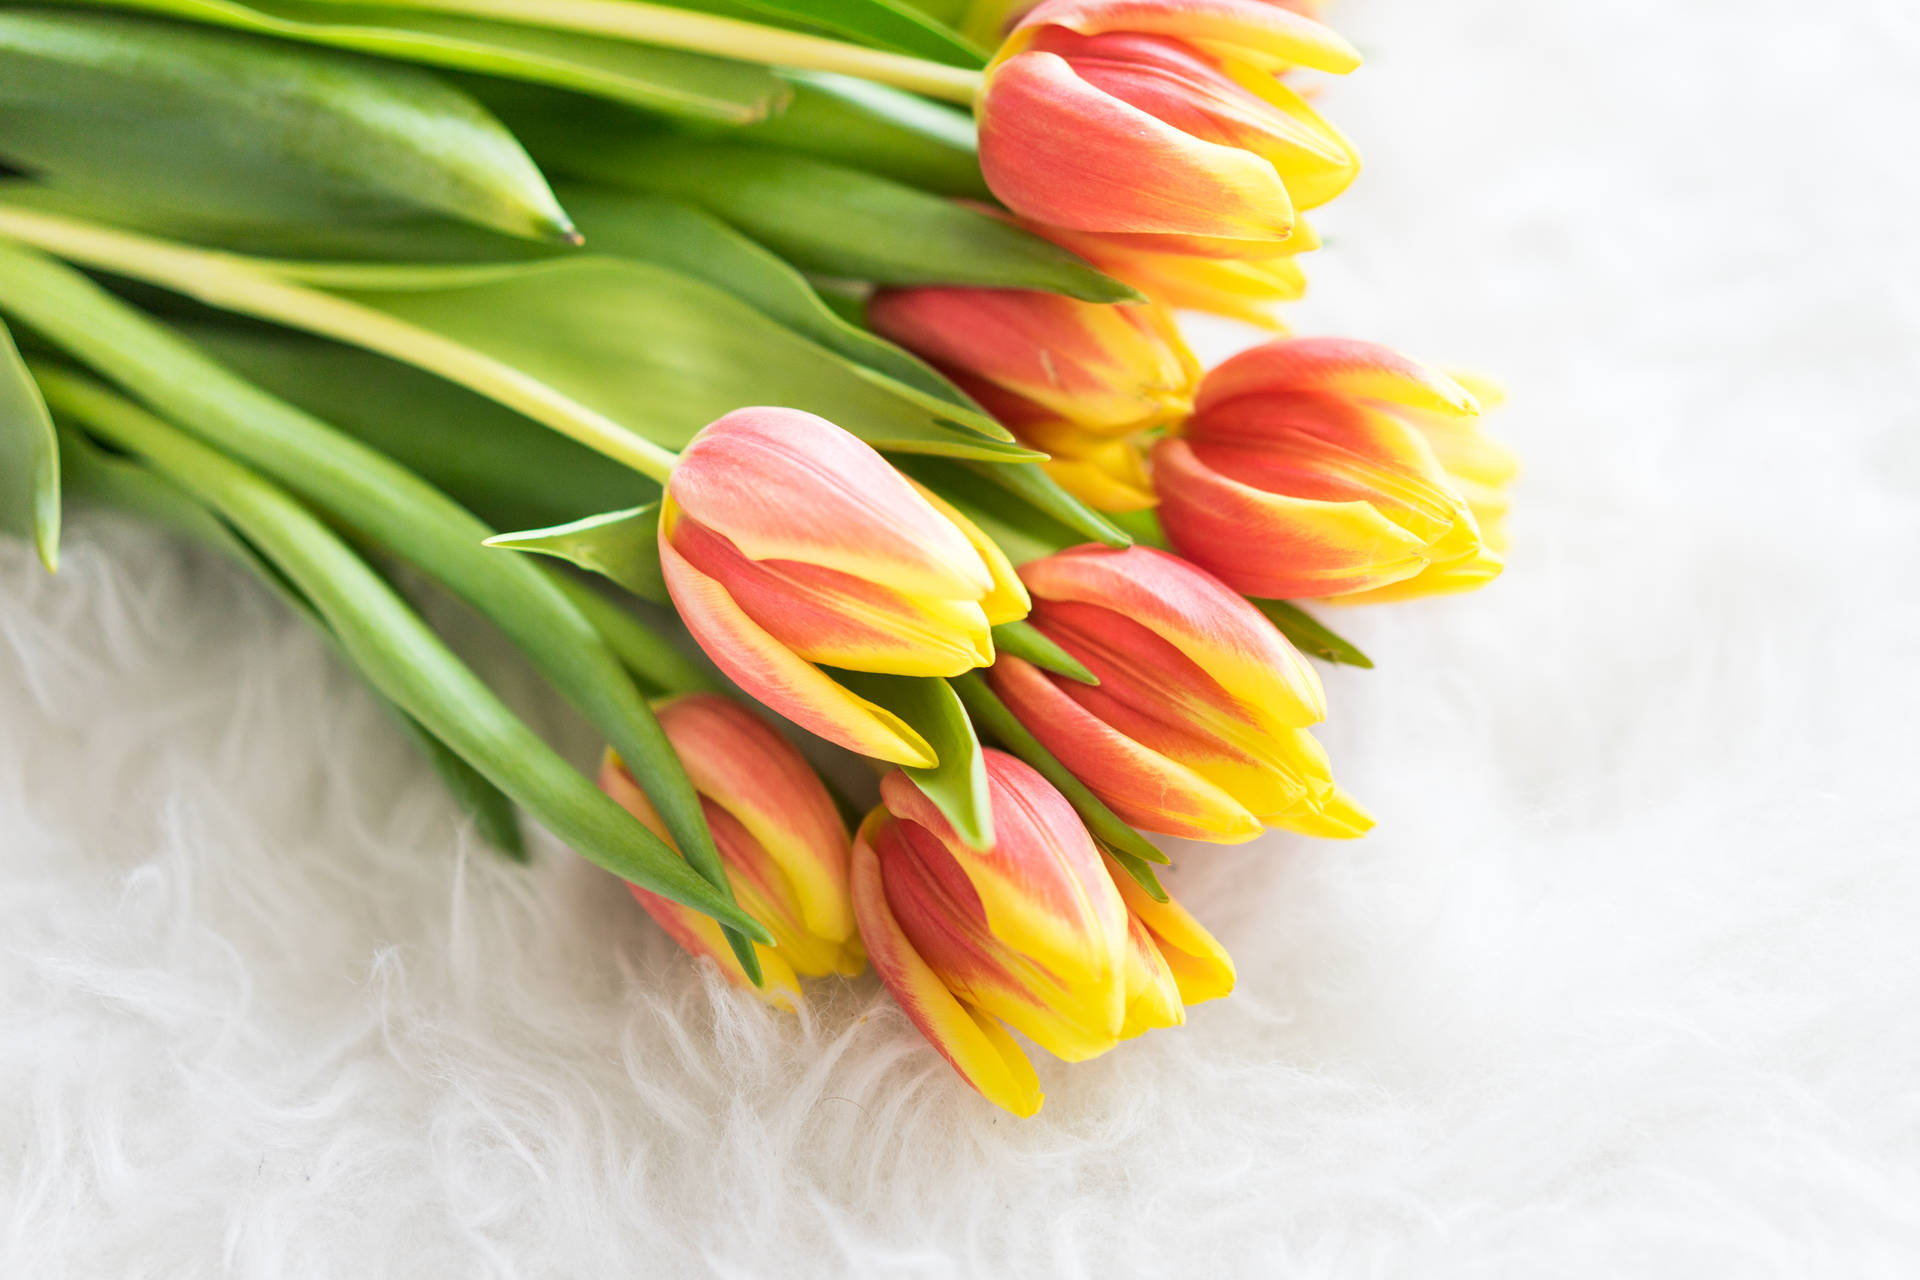 Romantic Love Flowers Pink And Yellow Tulips Wallpaper